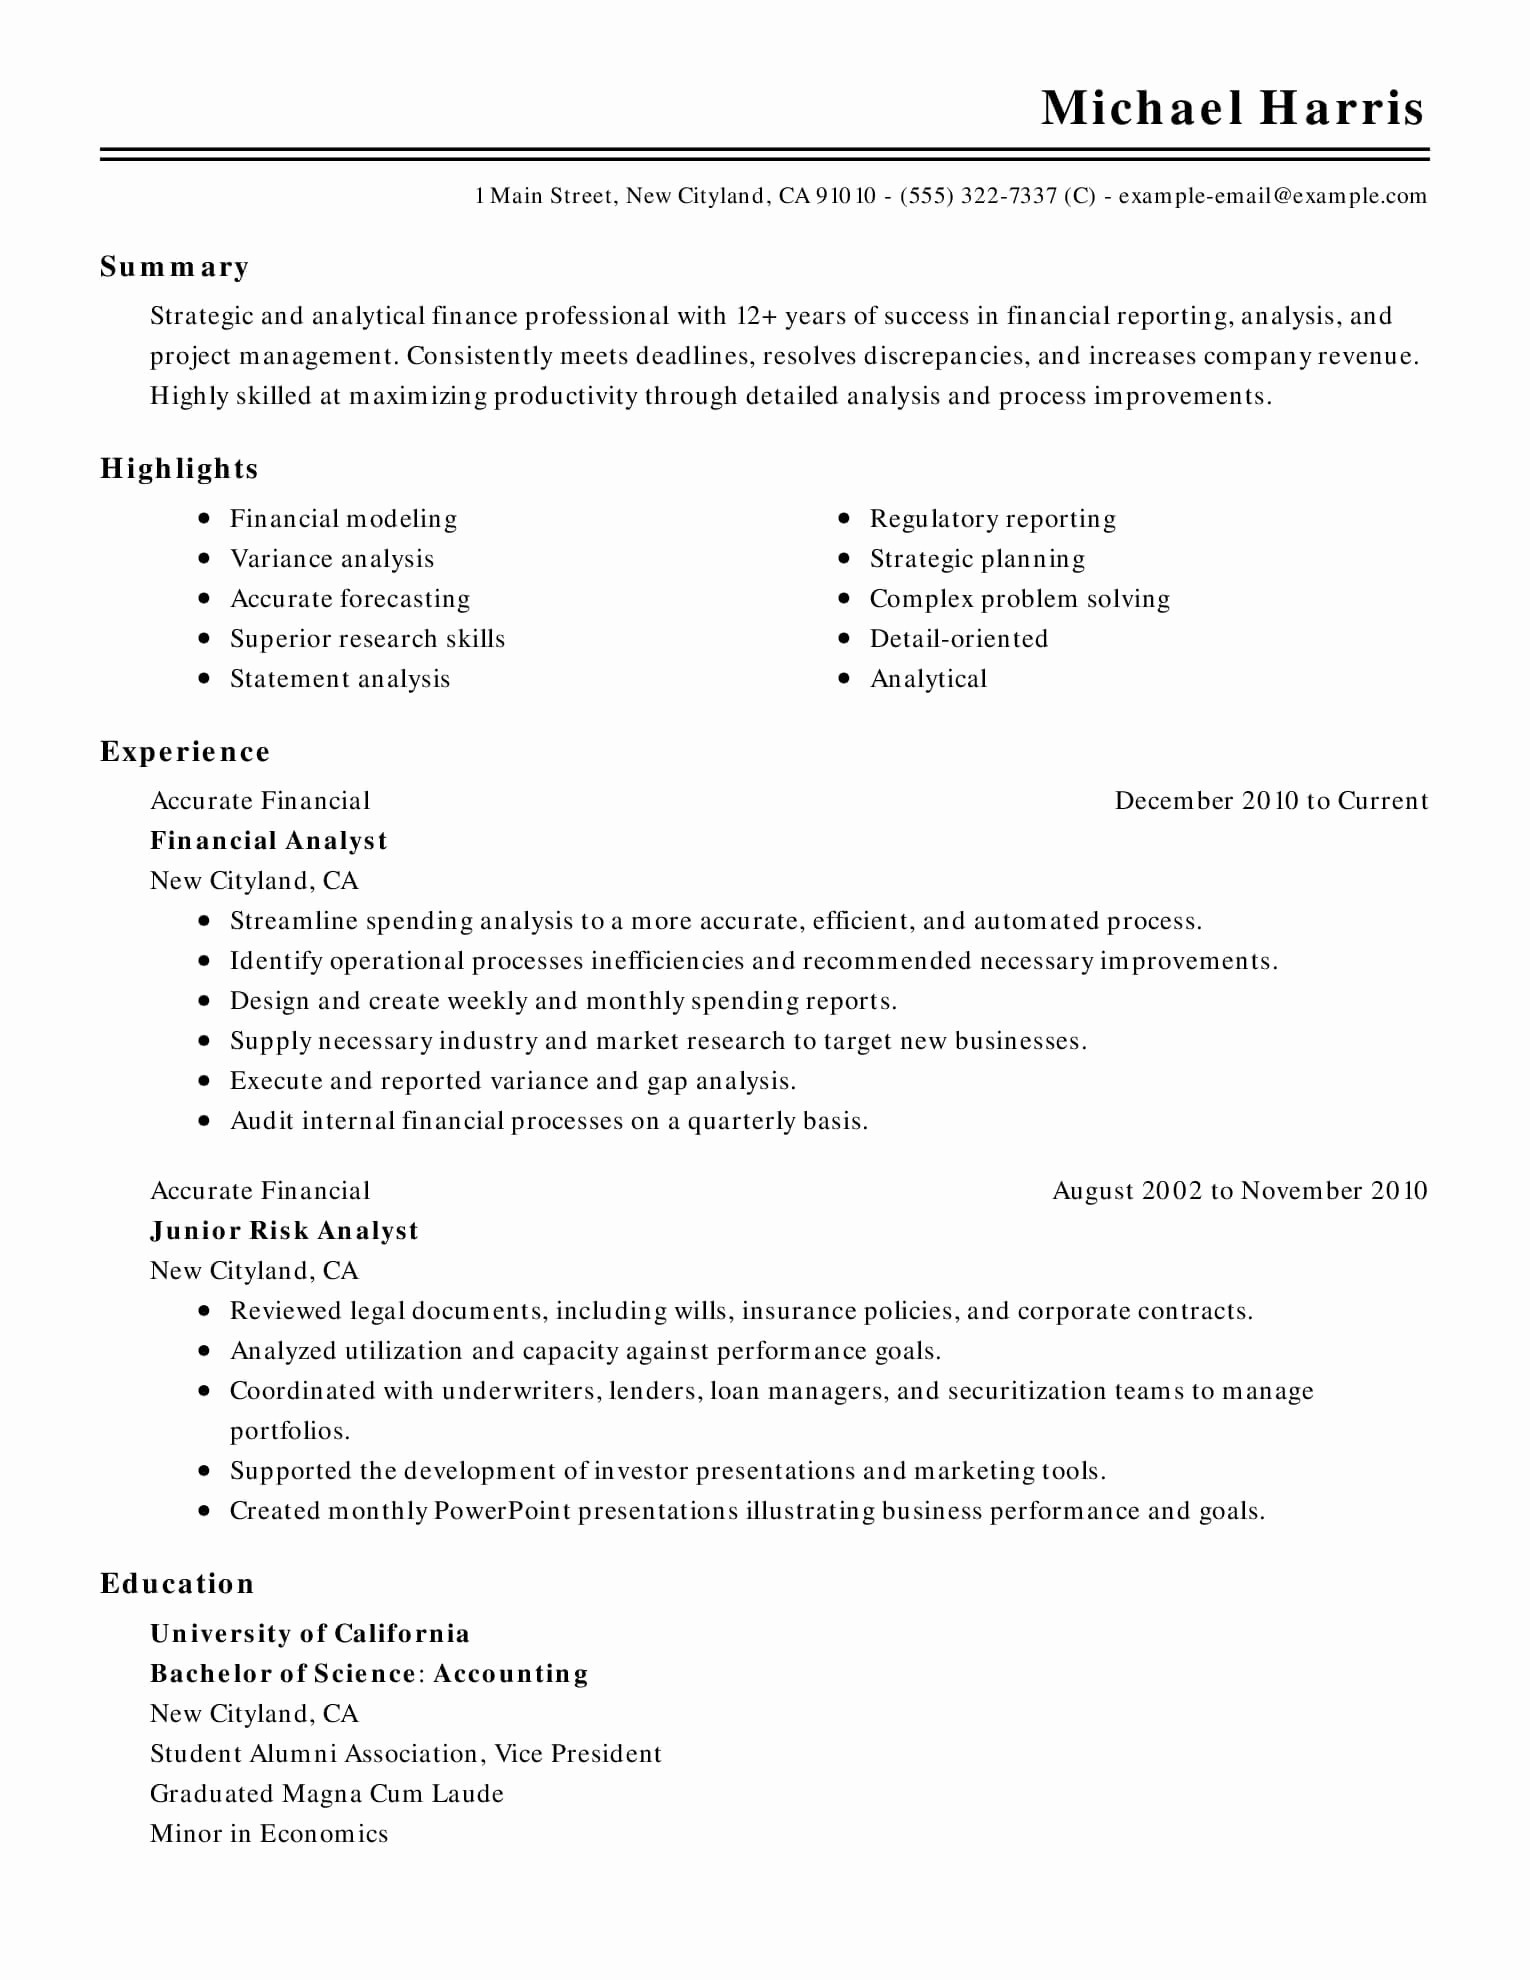 Ms Word Template for Resume Lovely 15 Of the Best Resume Templates for Microsoft Word Fice